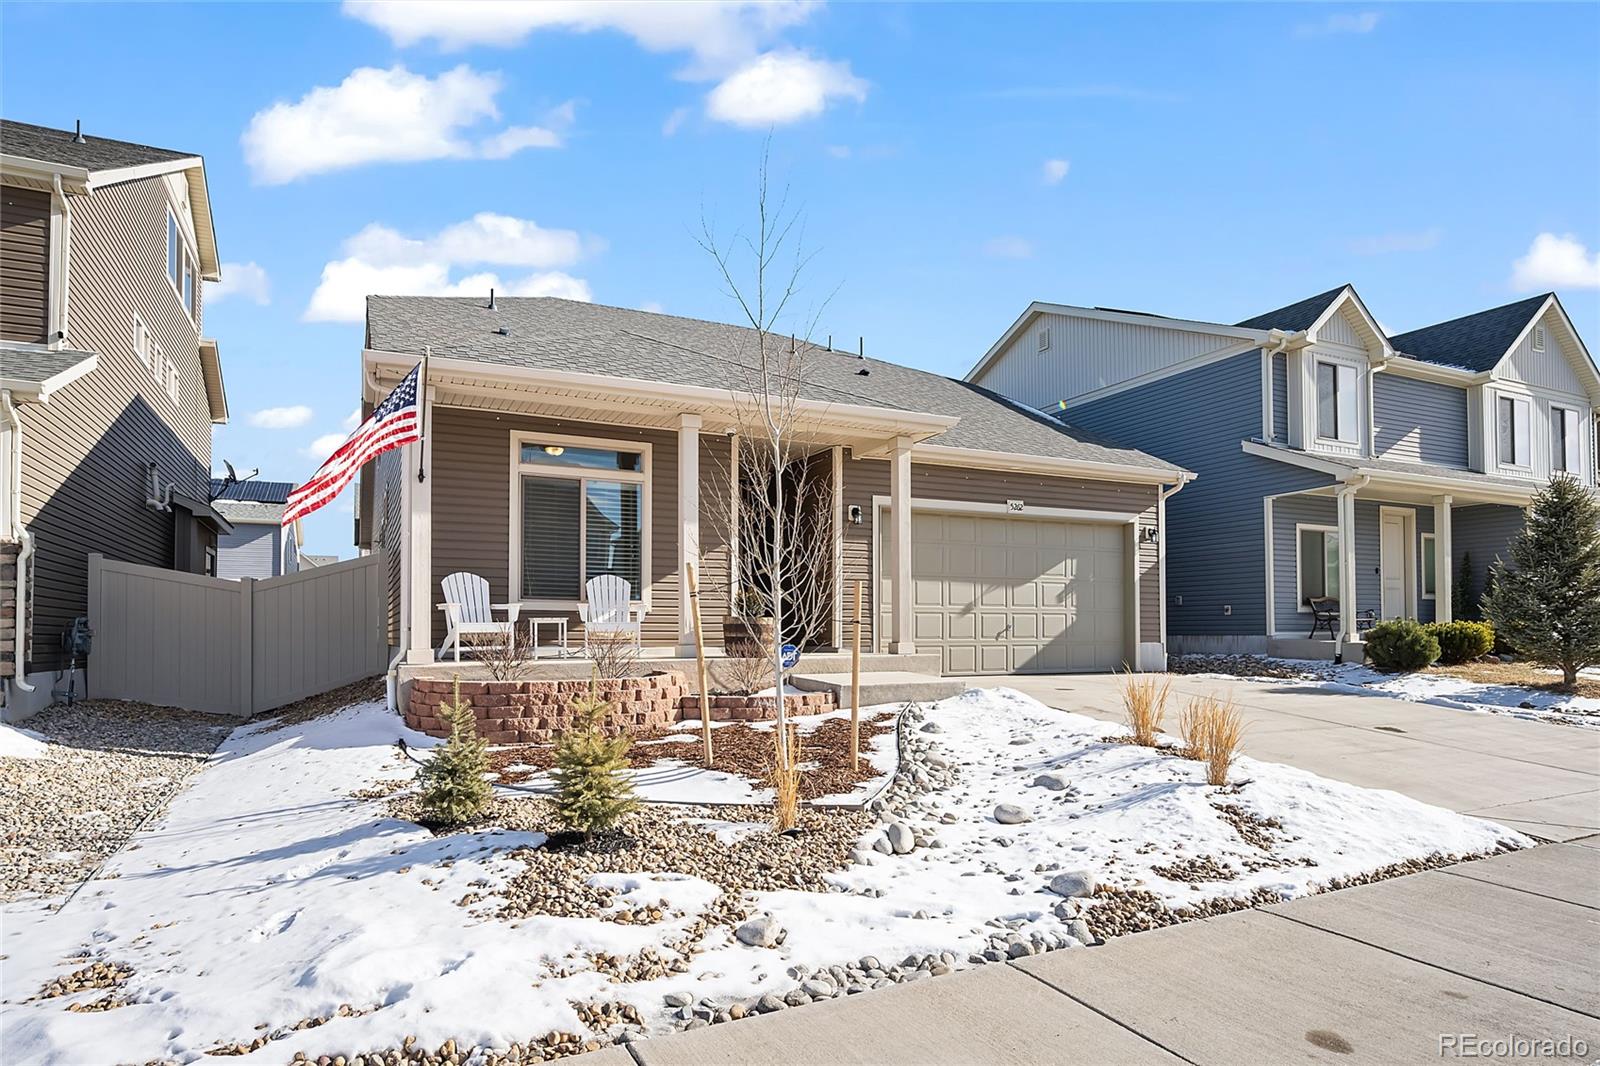 5262  truckee street, denver sold home. Closed on 2024-03-12 for $595,000.